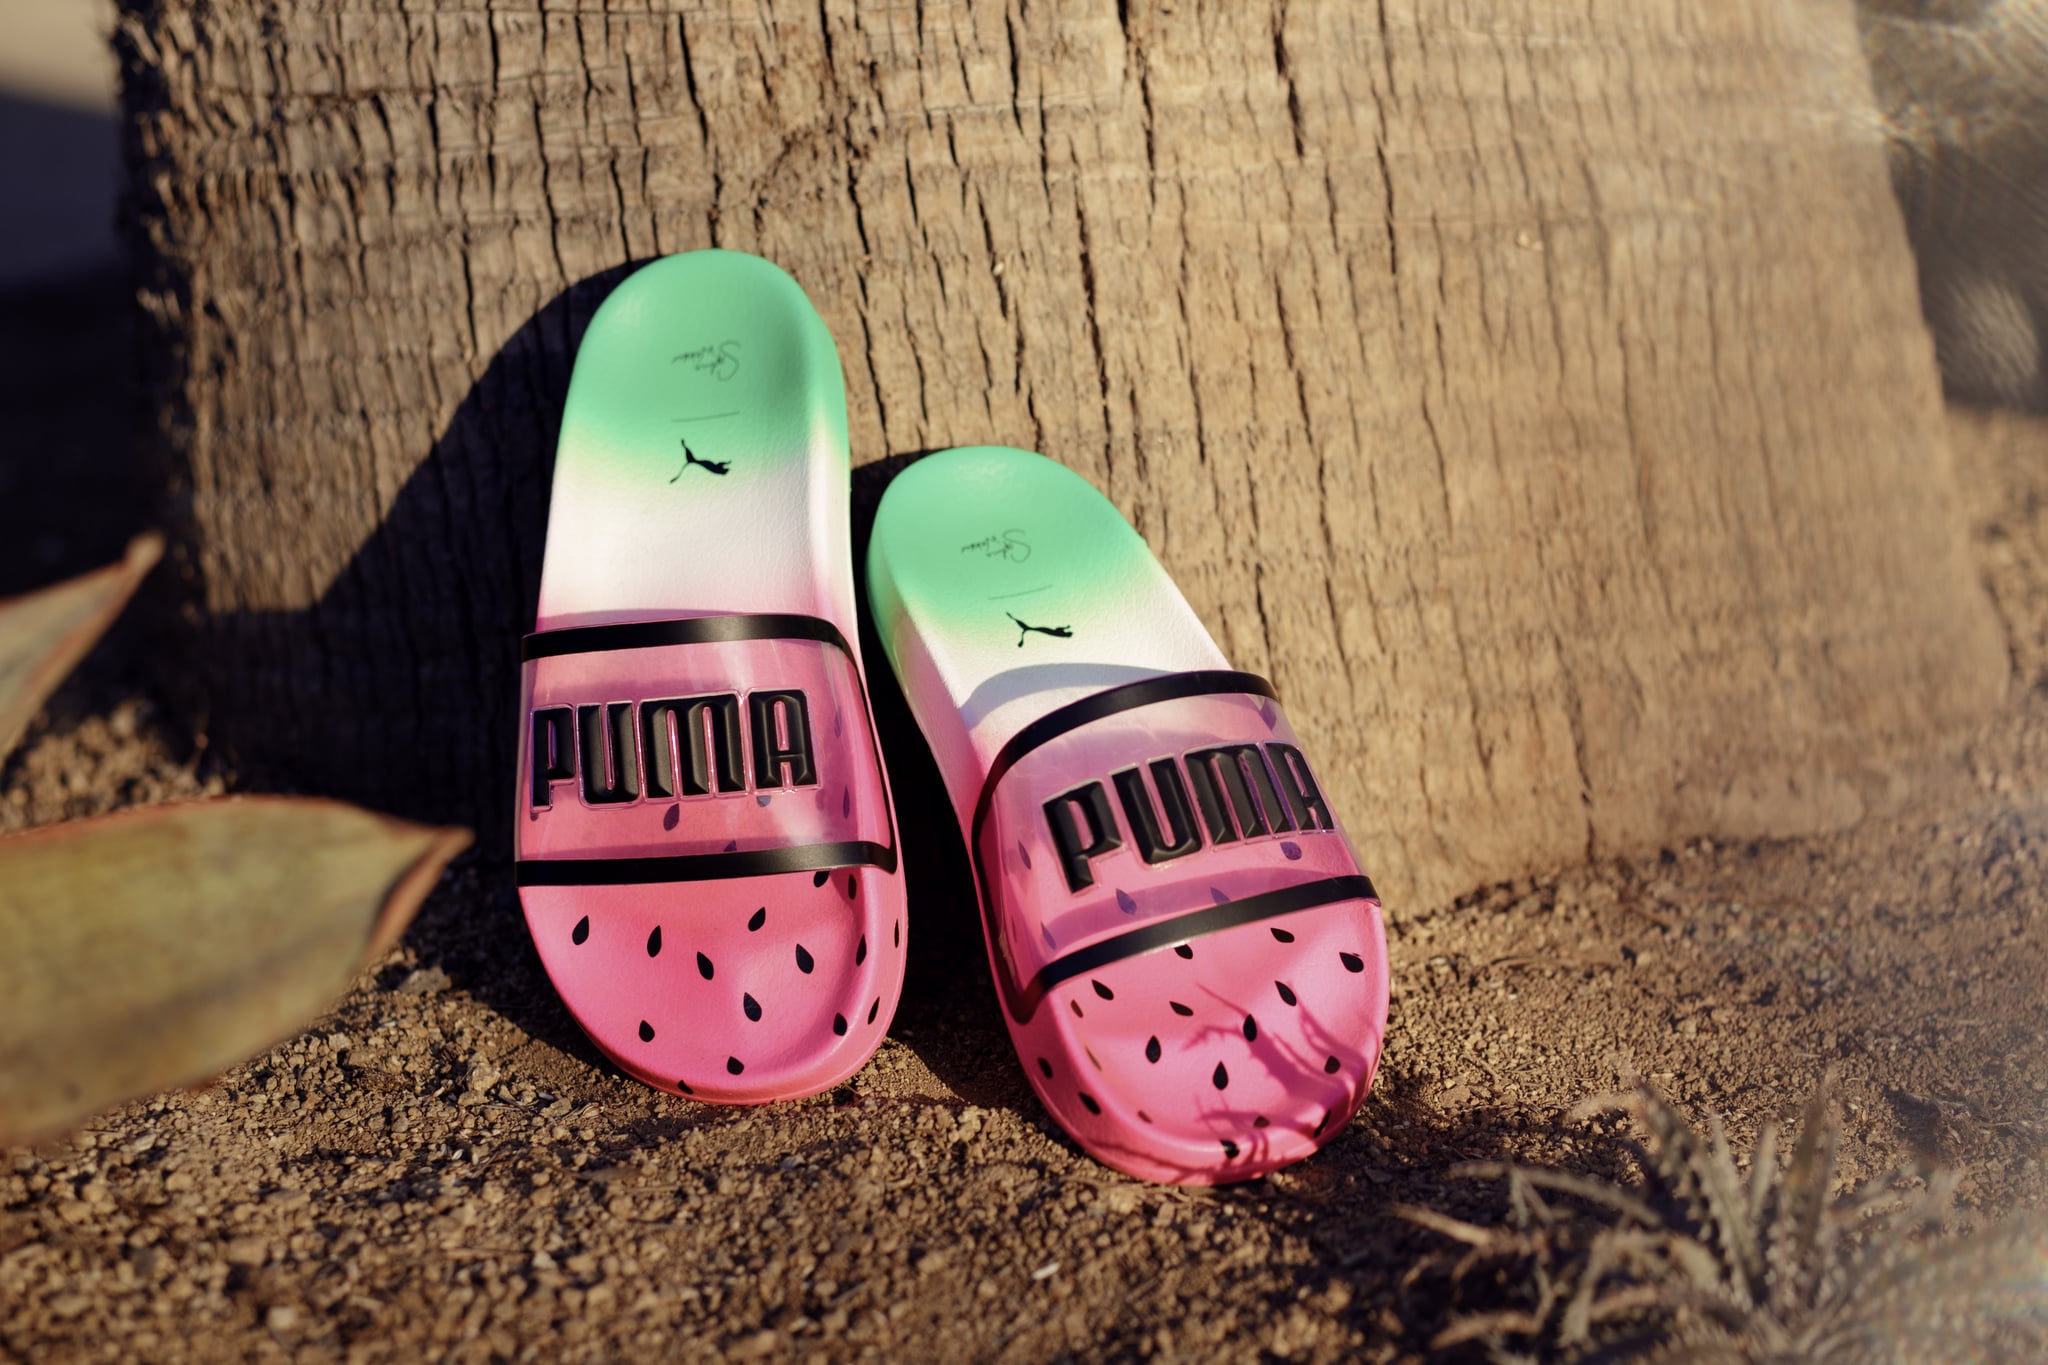 Puma x Sophia Webster Collection 2018 